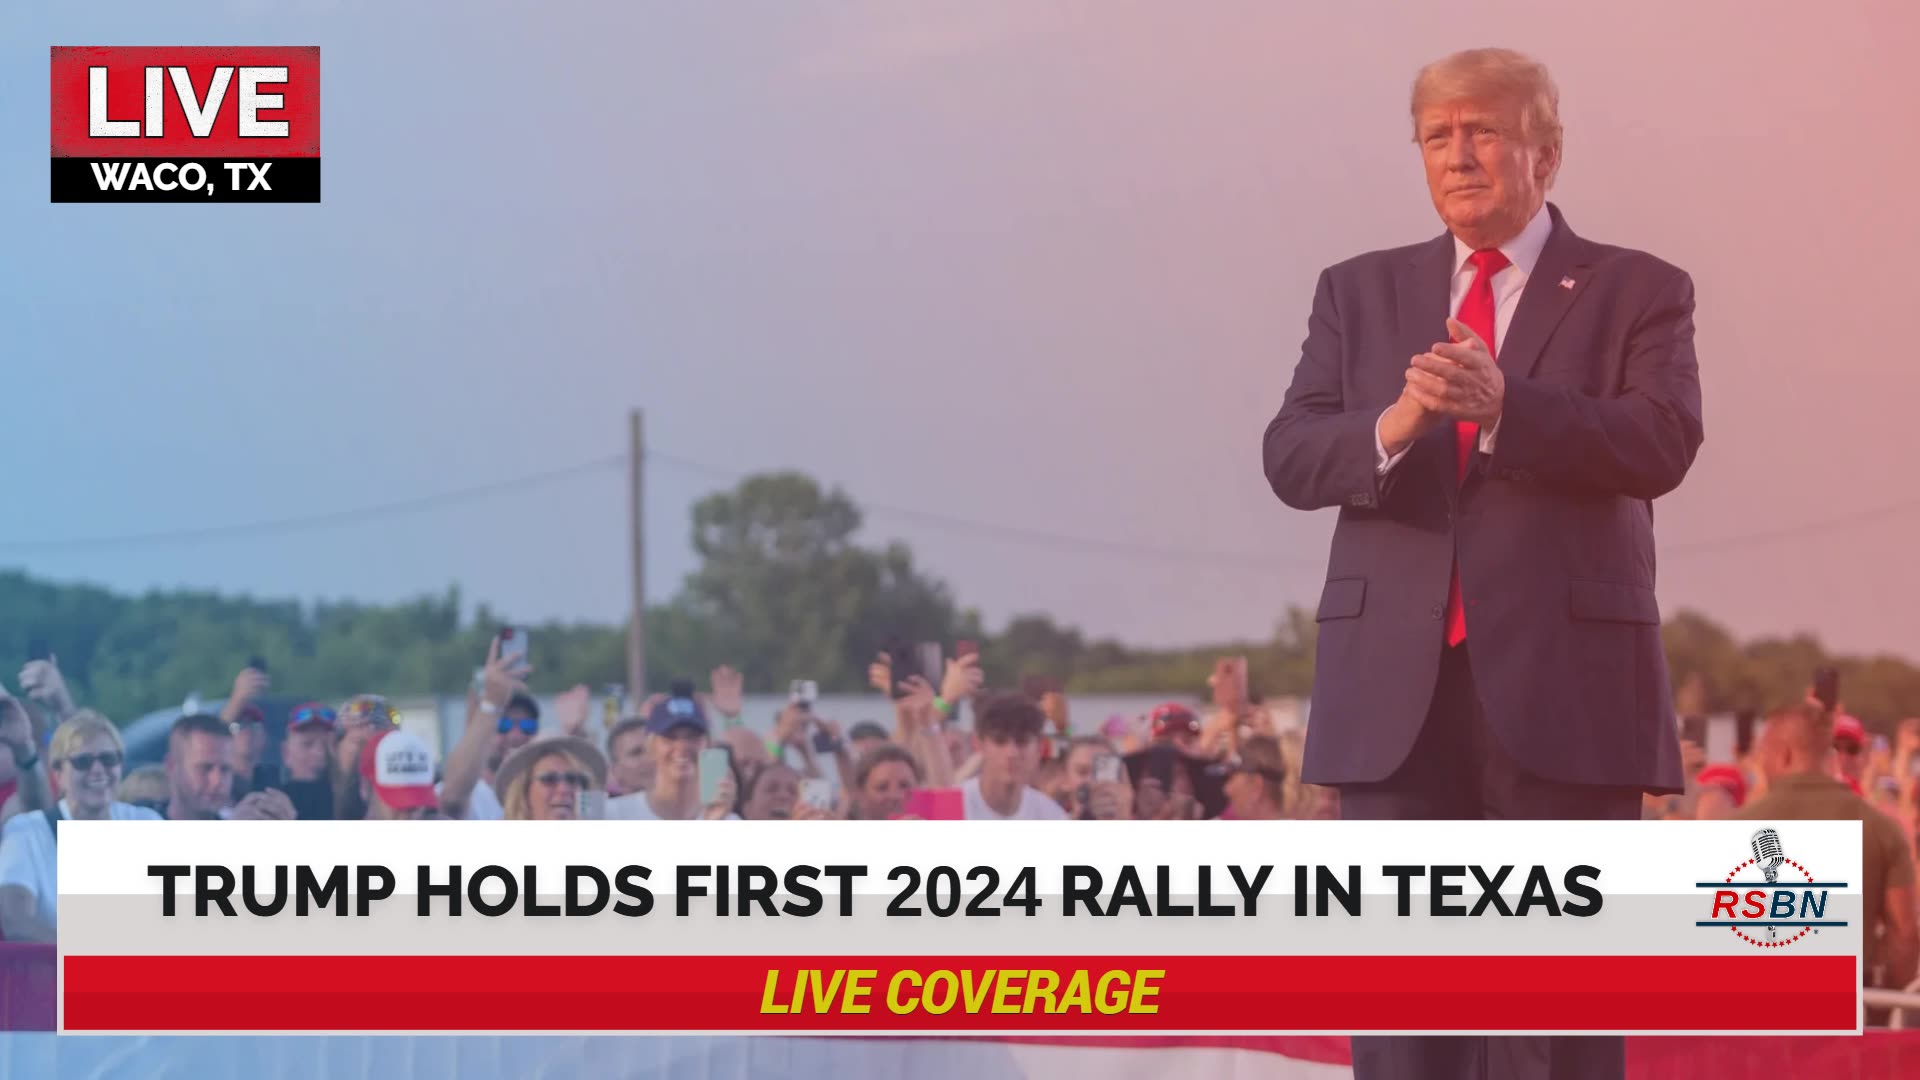 ? TRUMP RALLY LIVE: President Trump Holds First 2024 Campaign Rally in WACO, TX- 3/25/23